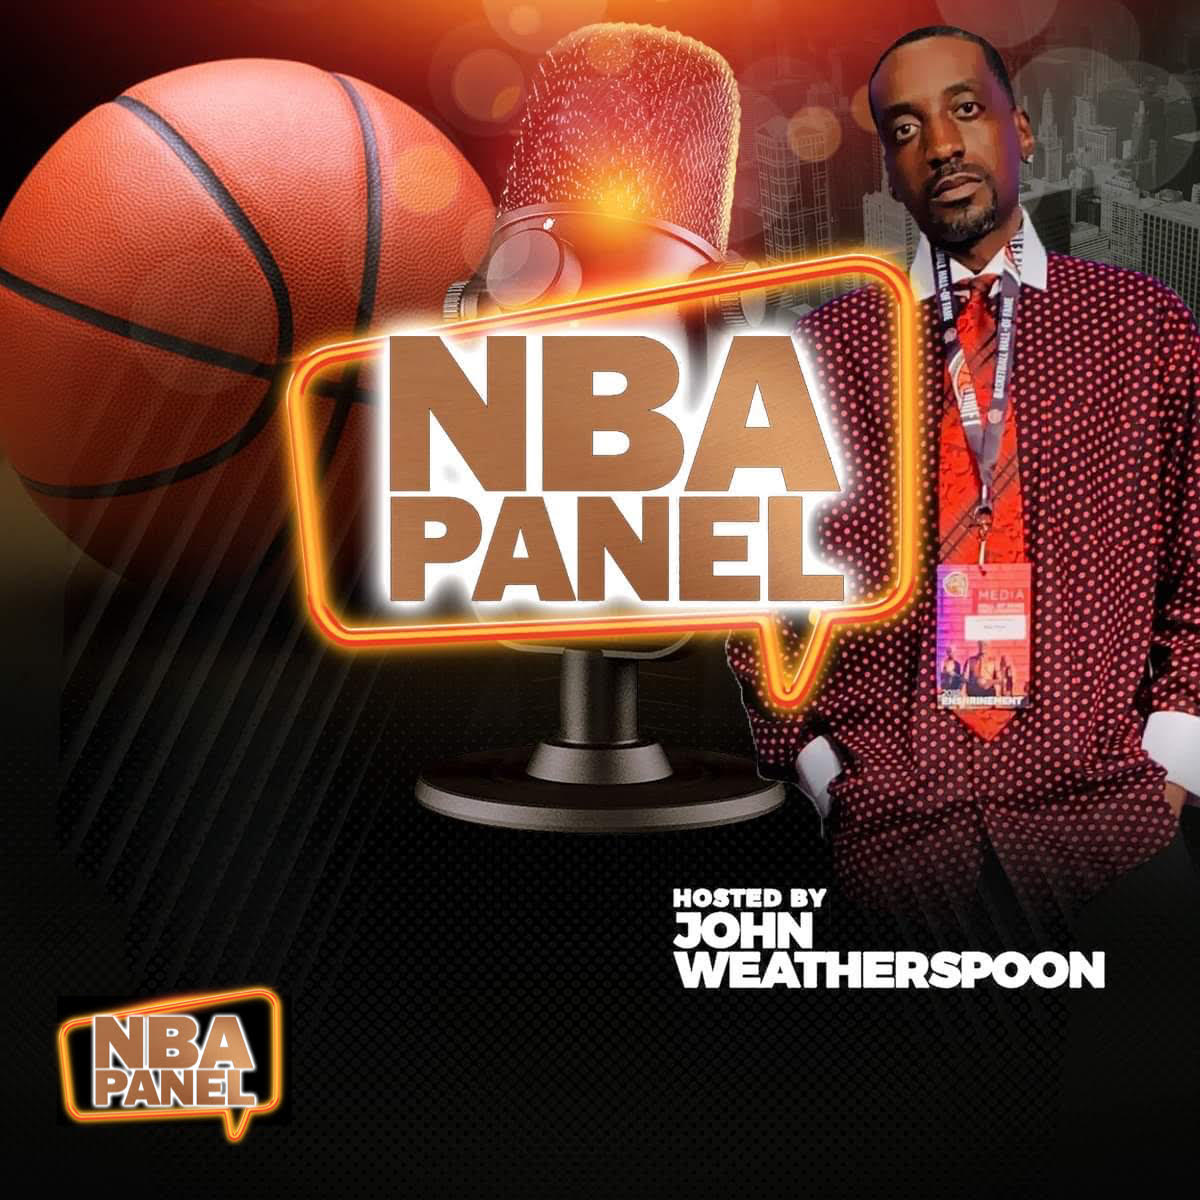 NBA Panel Podcast - Hosted by John Weatherspoon